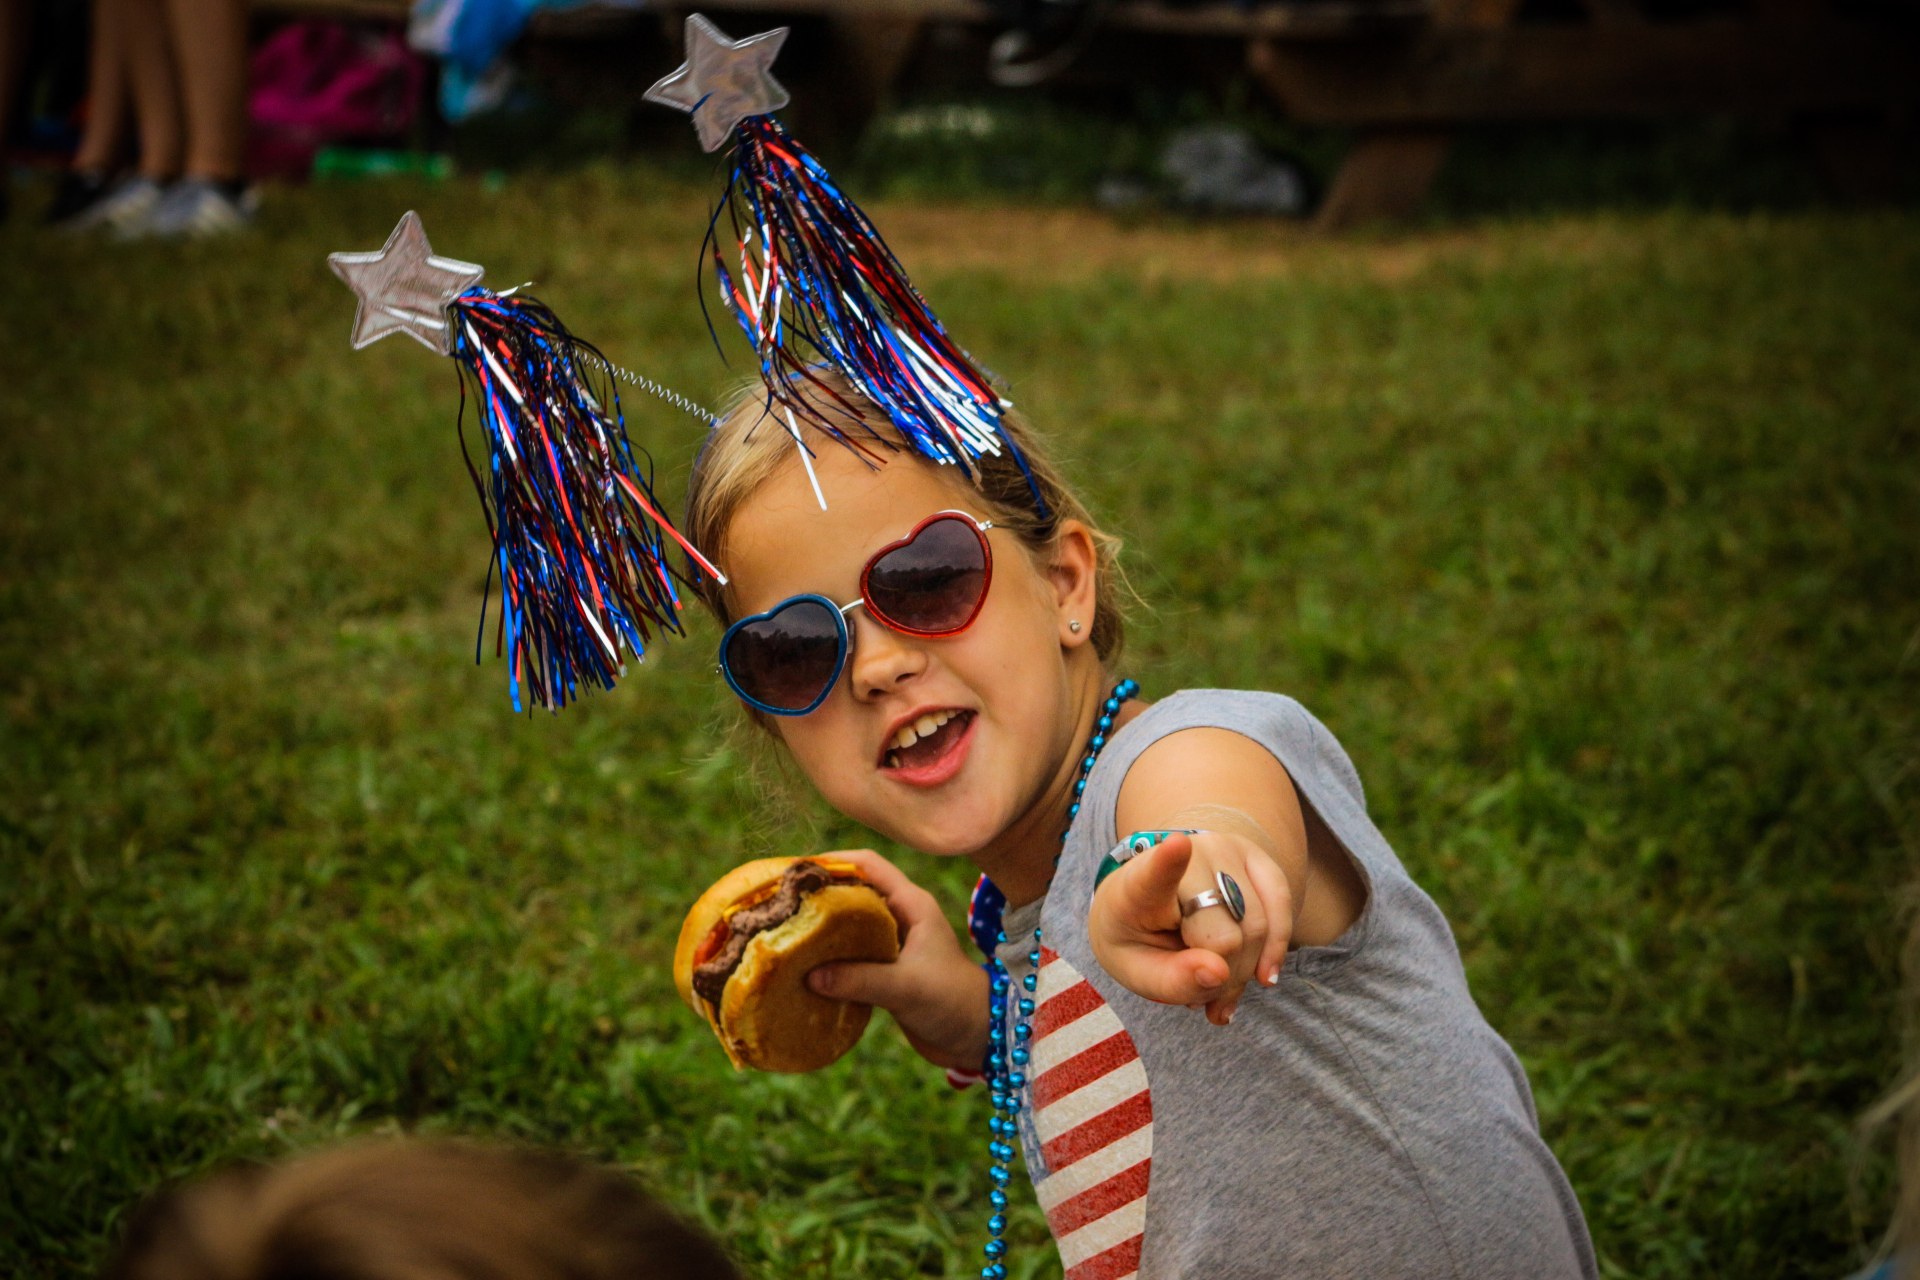 A junior camper shows off her fashion with a fourth of July outfit brought for our independance!